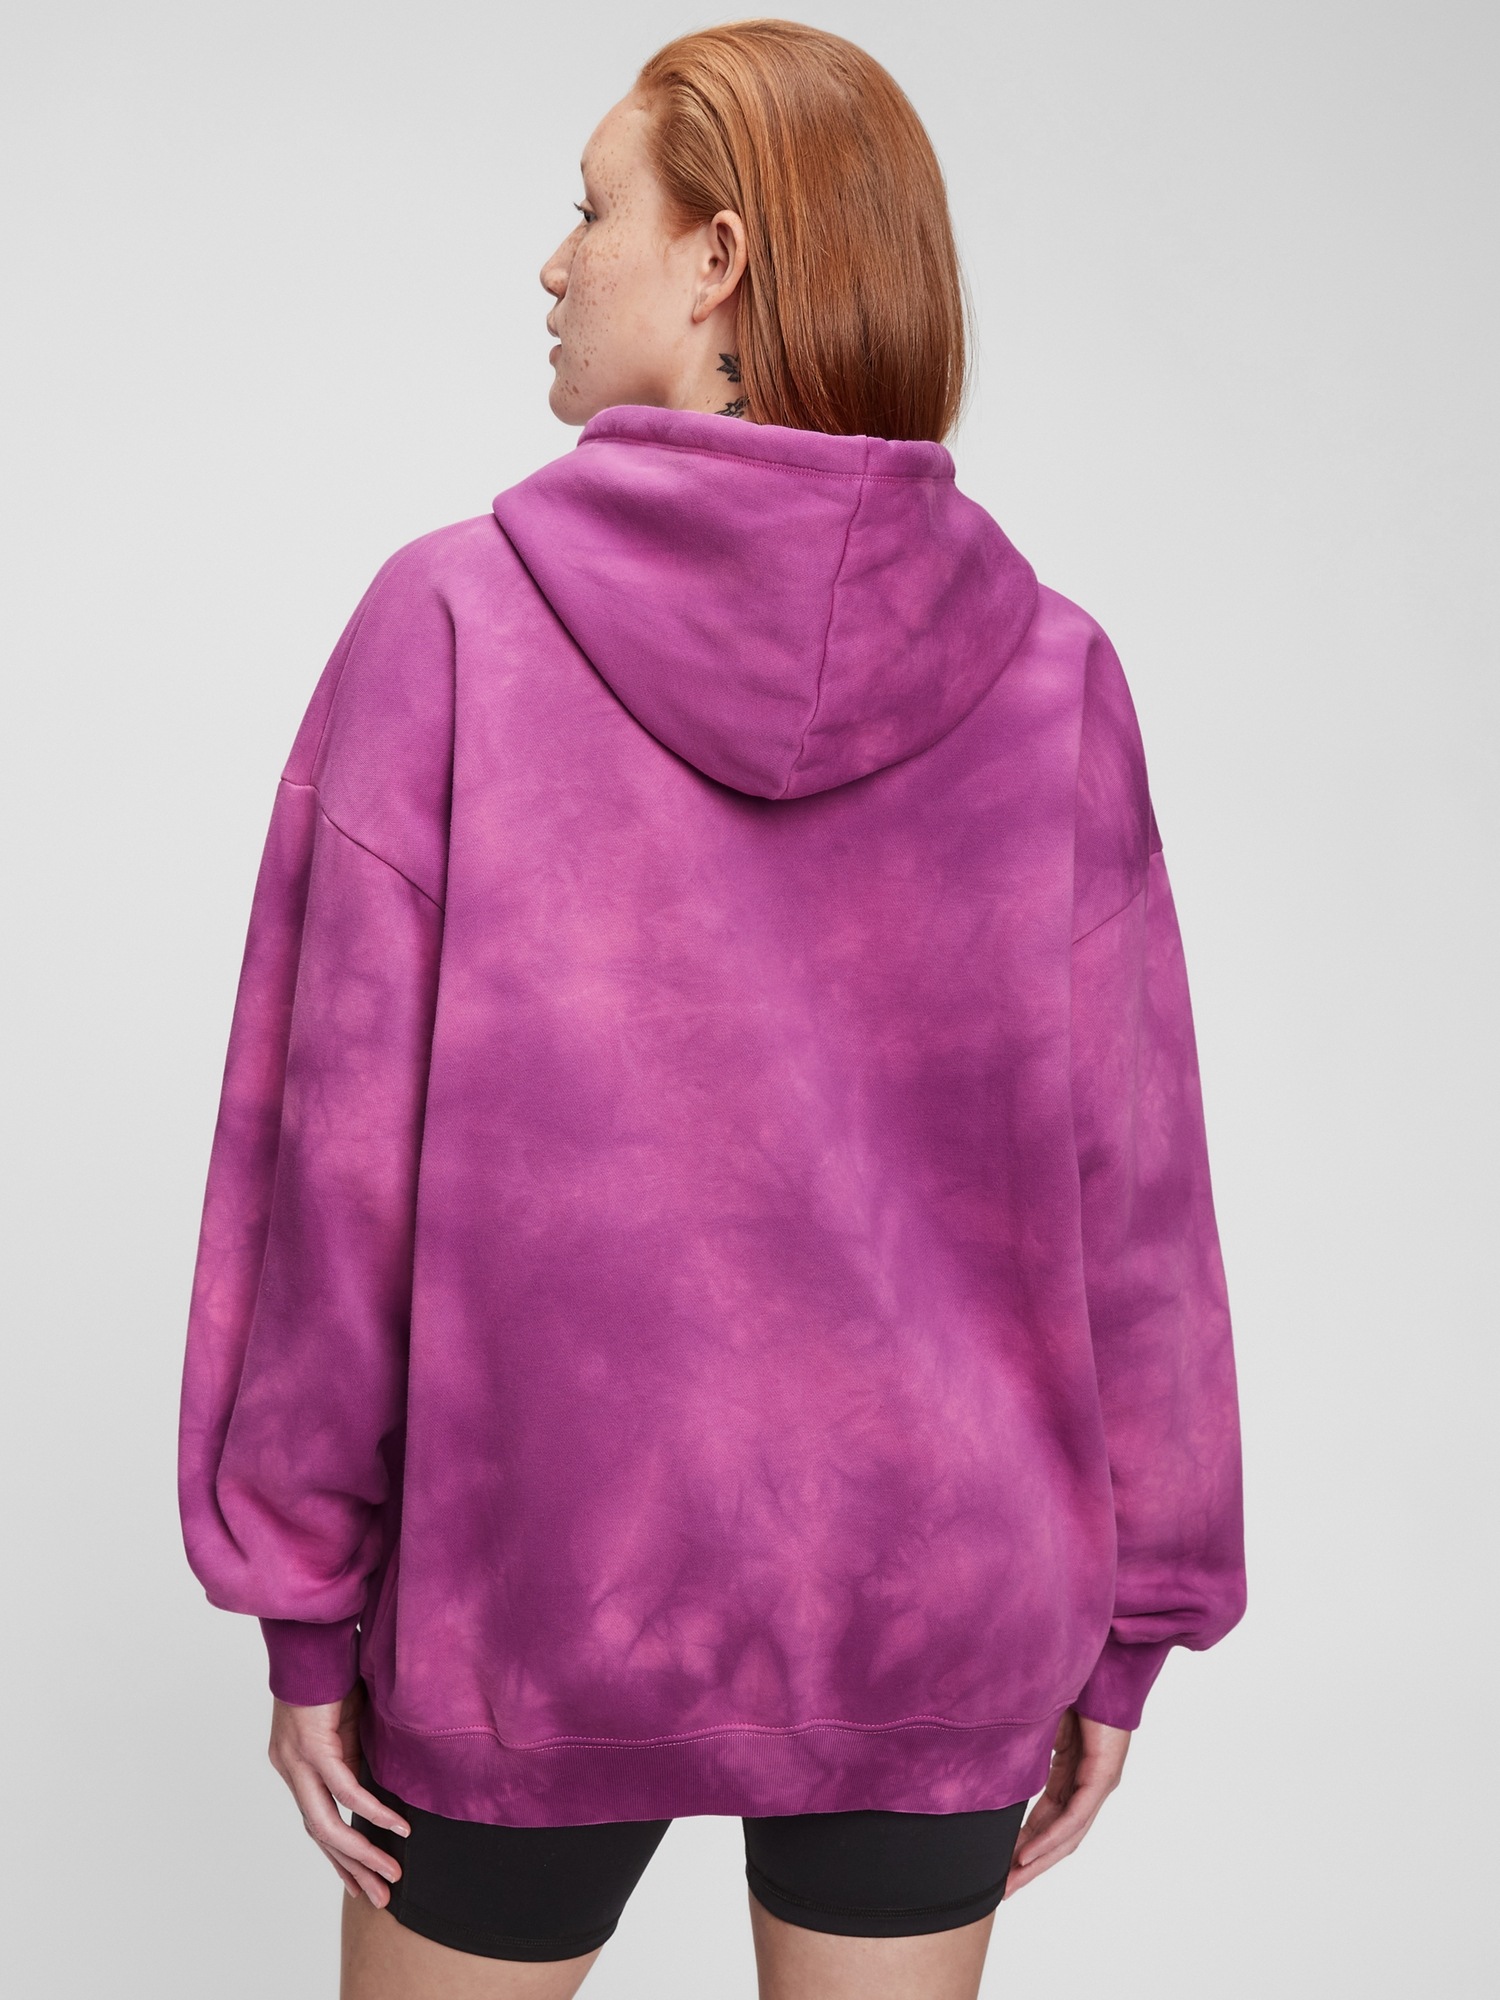 Womens Oversized Ruched Oversized Hoodie Women With Drawstring Solid Color,  Loose Fit, Ideal For Winter Athleisure And Fashion From Blueberry12, $22.95